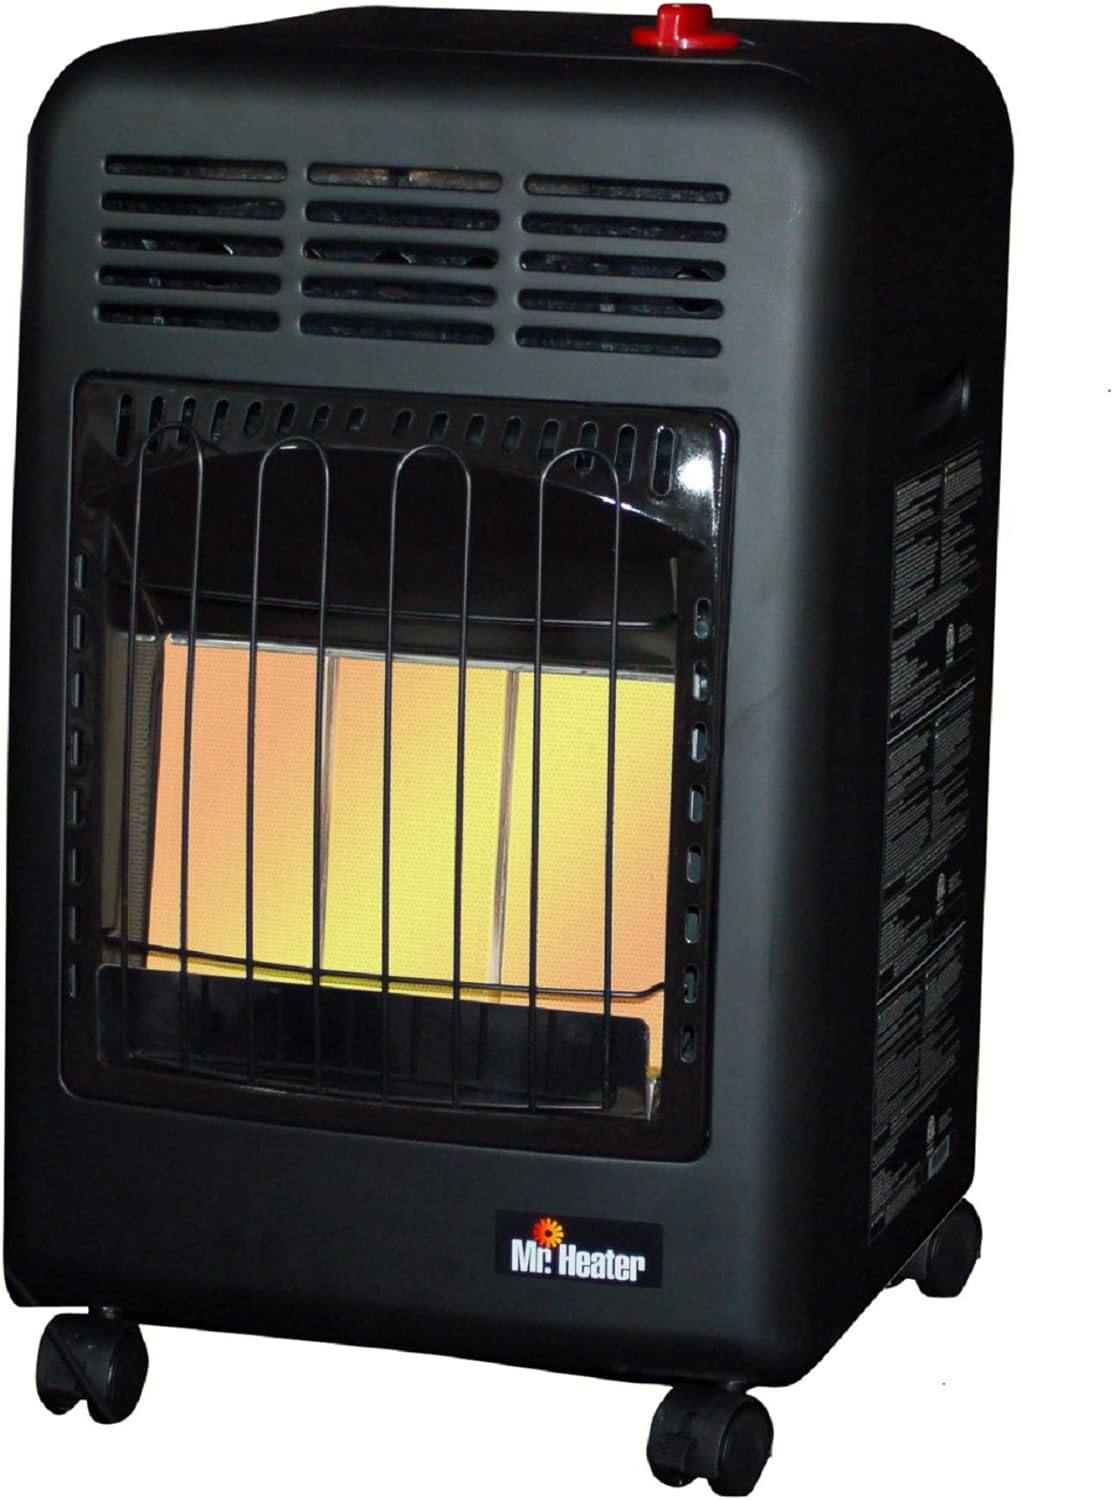 Mr. Heater MH18CH Radiant Cabinet LP Heater Review